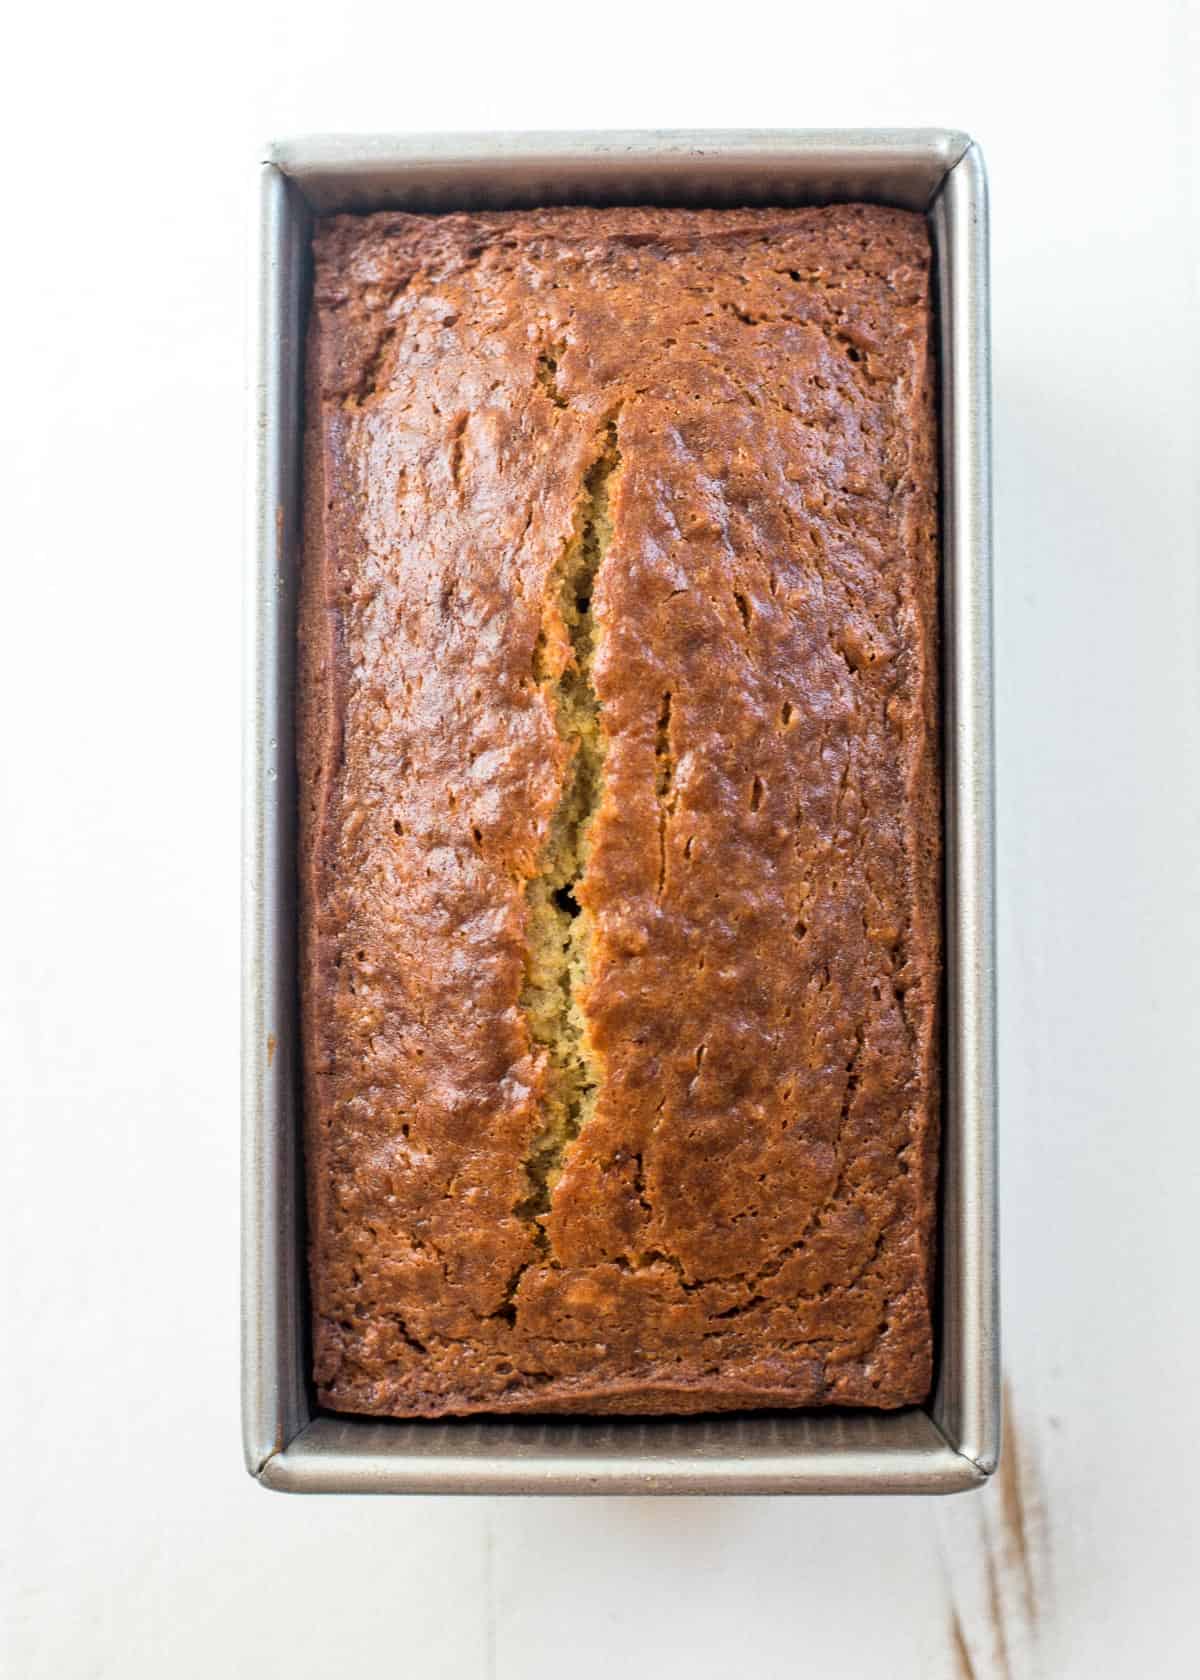 banana bread in a loaf pan